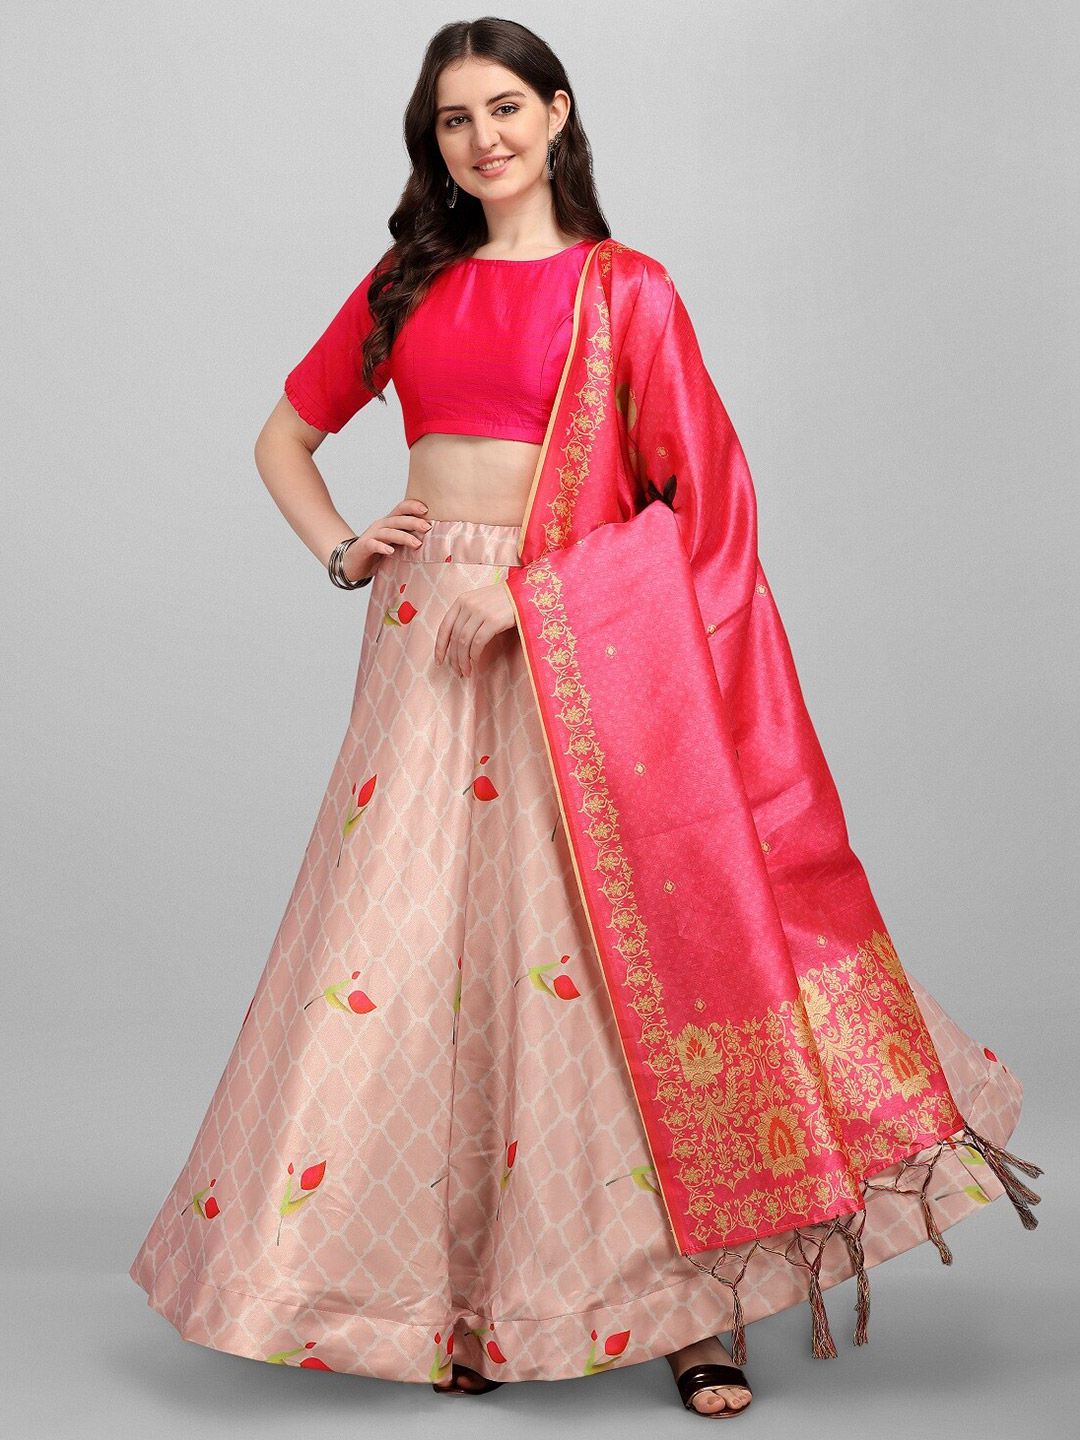 Ethnic Yard Peach-Coloured & White Semi-Stitched Lehenga & Unstitched Blouse With Dupatta Price in India